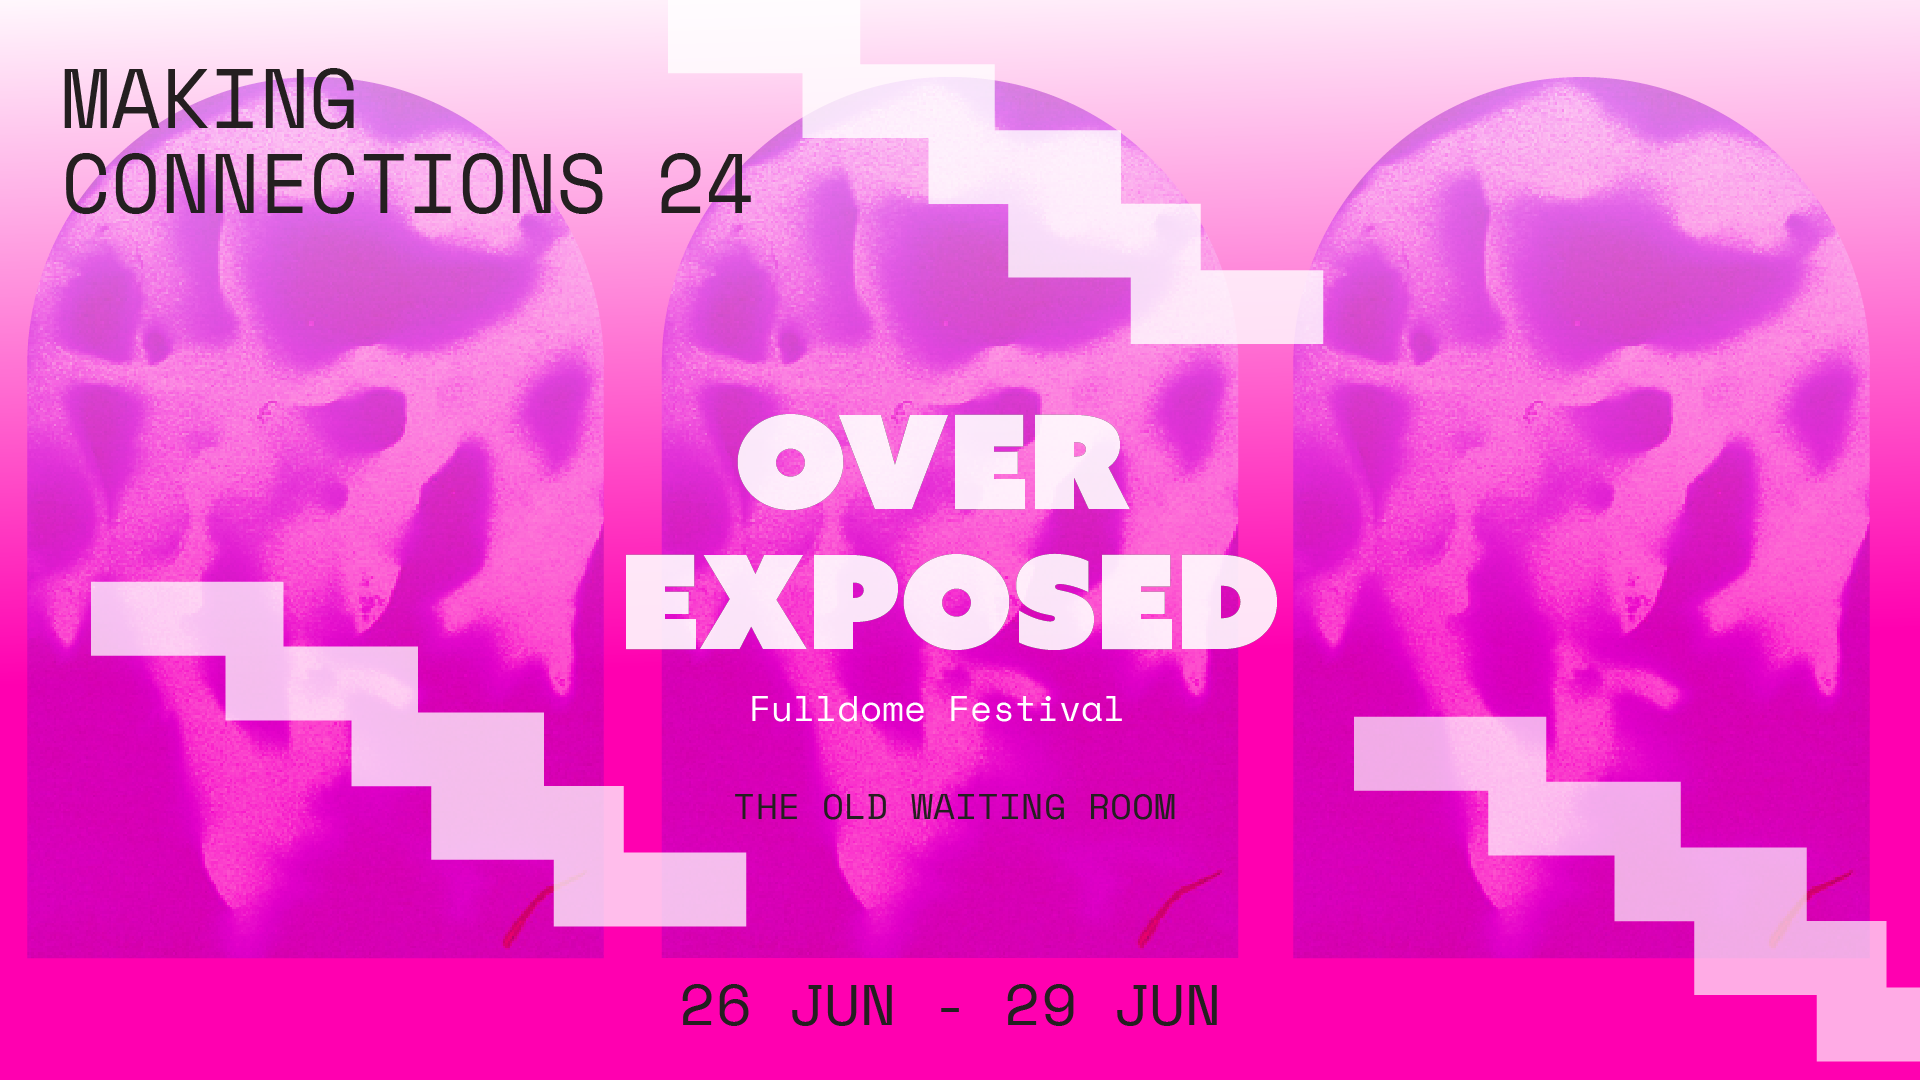 OVER-EXPOSED Full Dome Festival at The Old Waiting Room, Peckham Rye Station